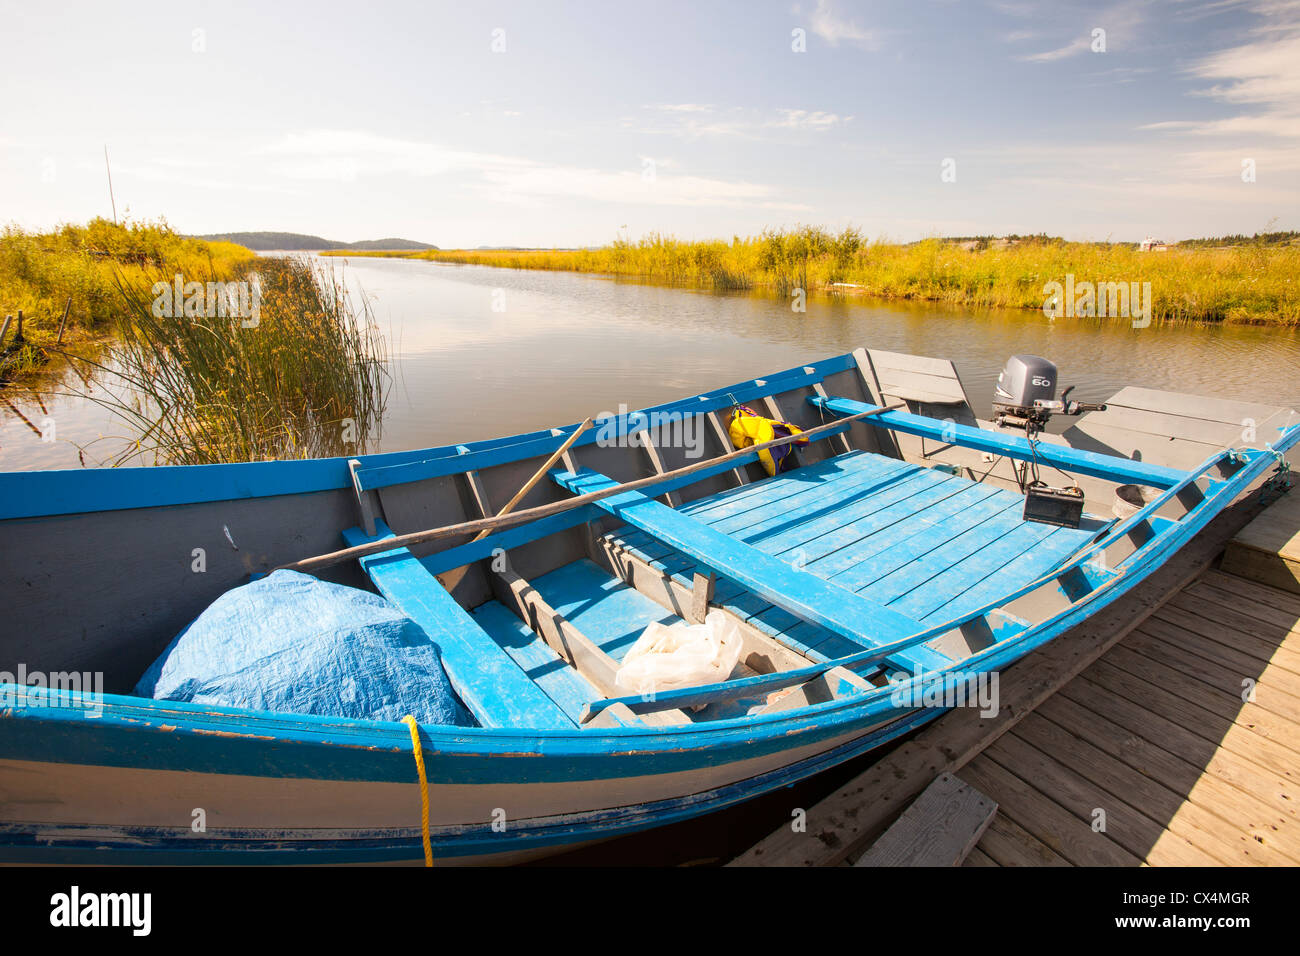 https://c8.alamy.com/comp/CX4MGR/a-fishing-boat-on-lake-athabasca-in-fort-chipewyan-a-first-nation-CX4MGR.jpg